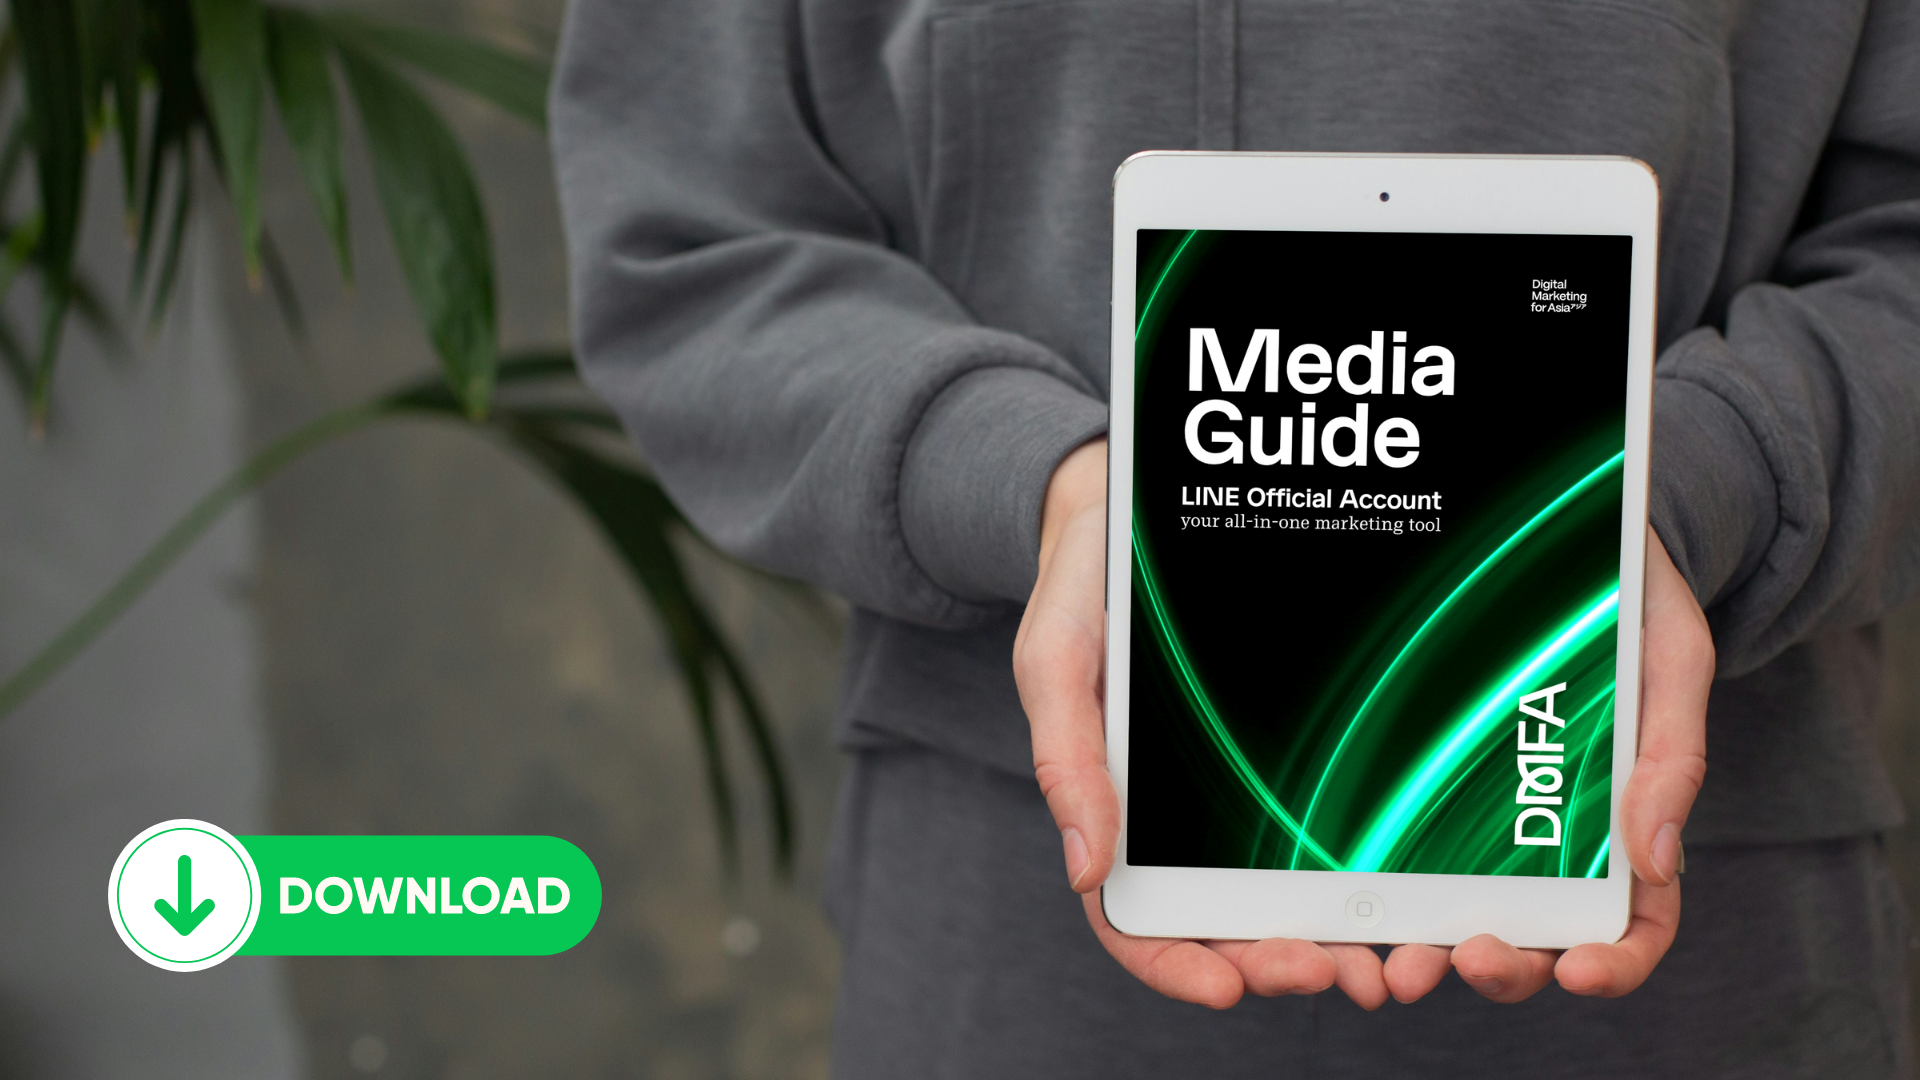 LINE Official Account Media Guide